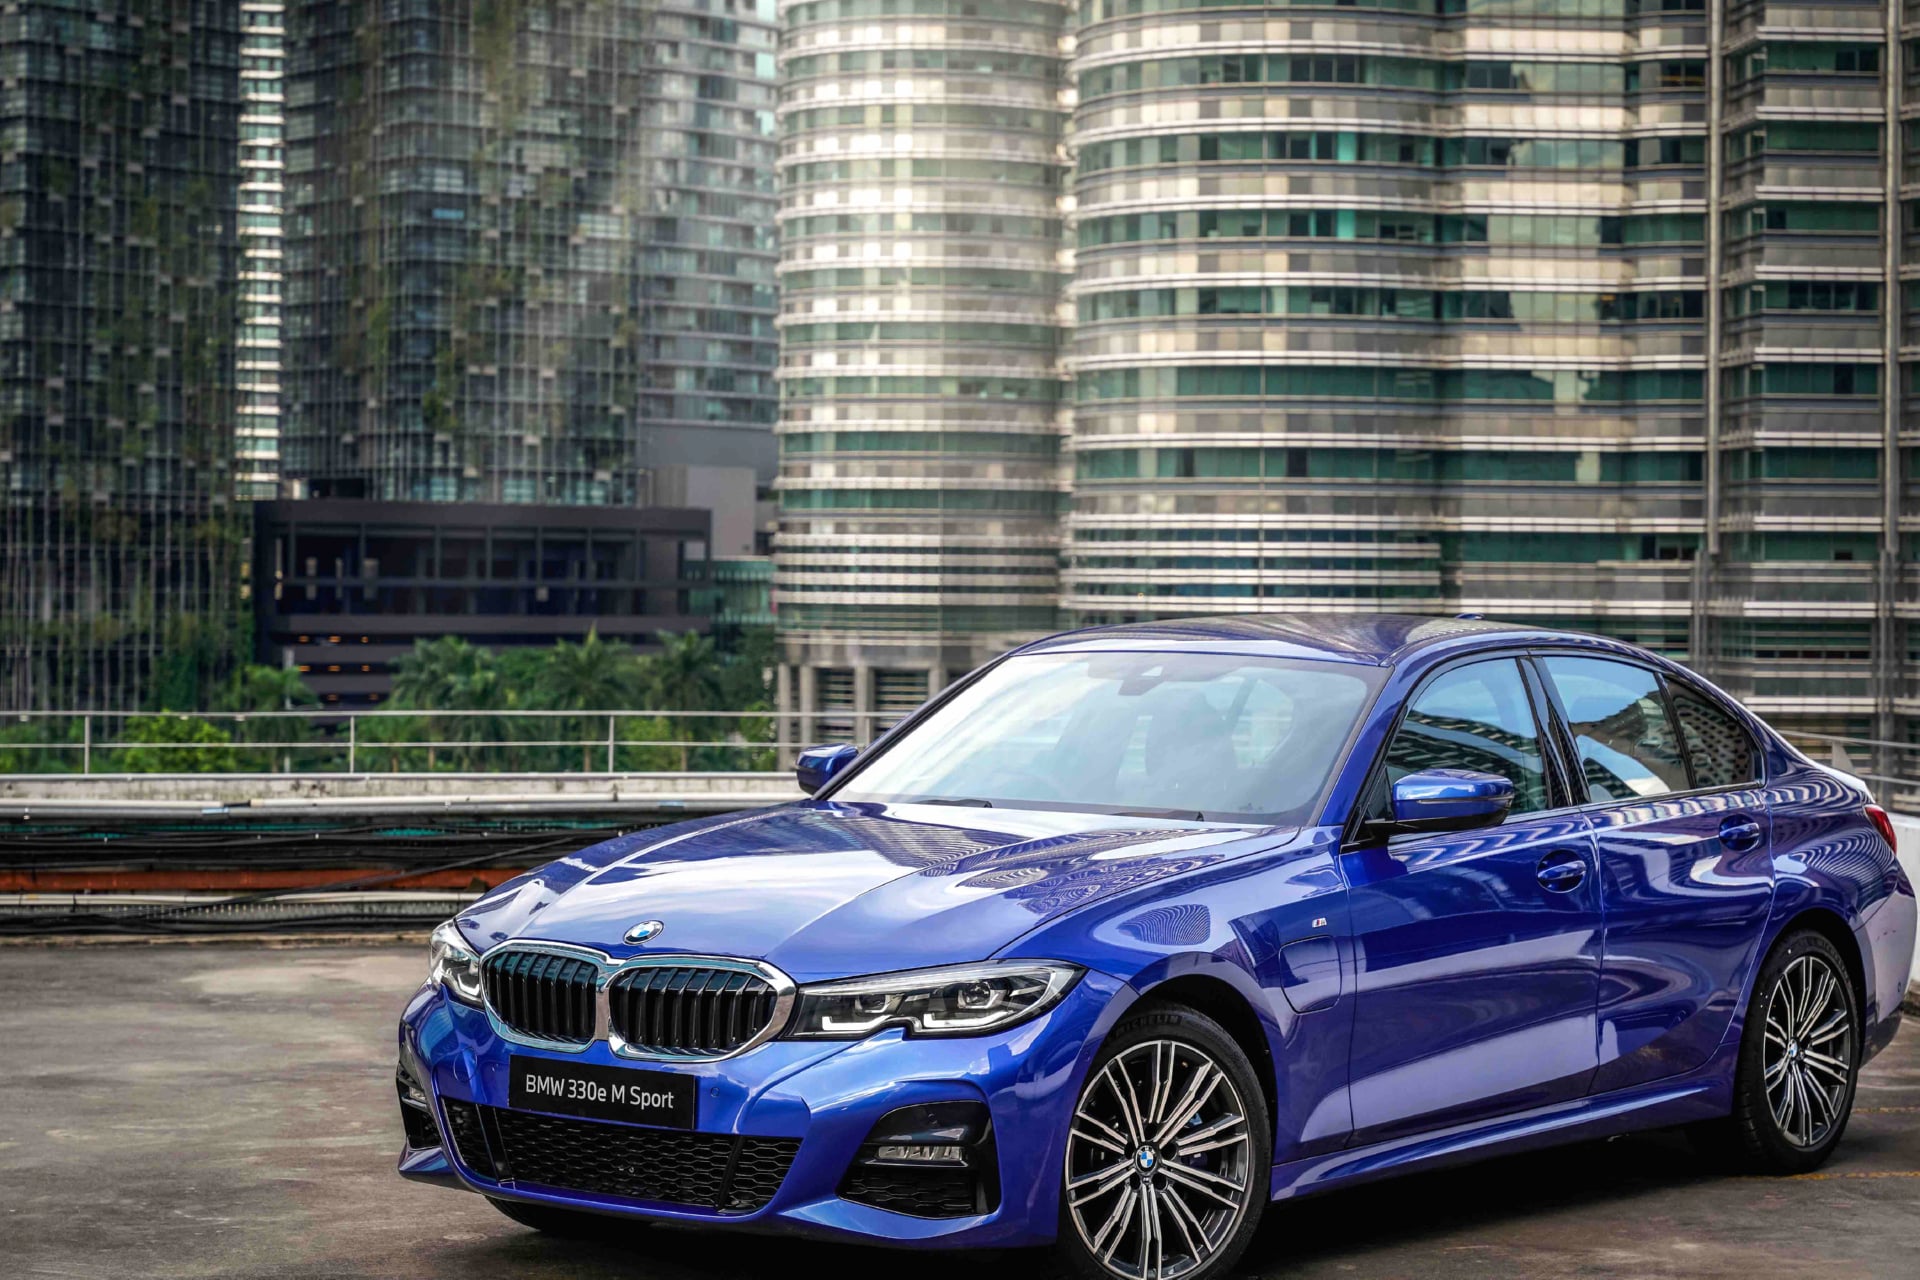 BMW 330e M Sport wallpapers HD quality